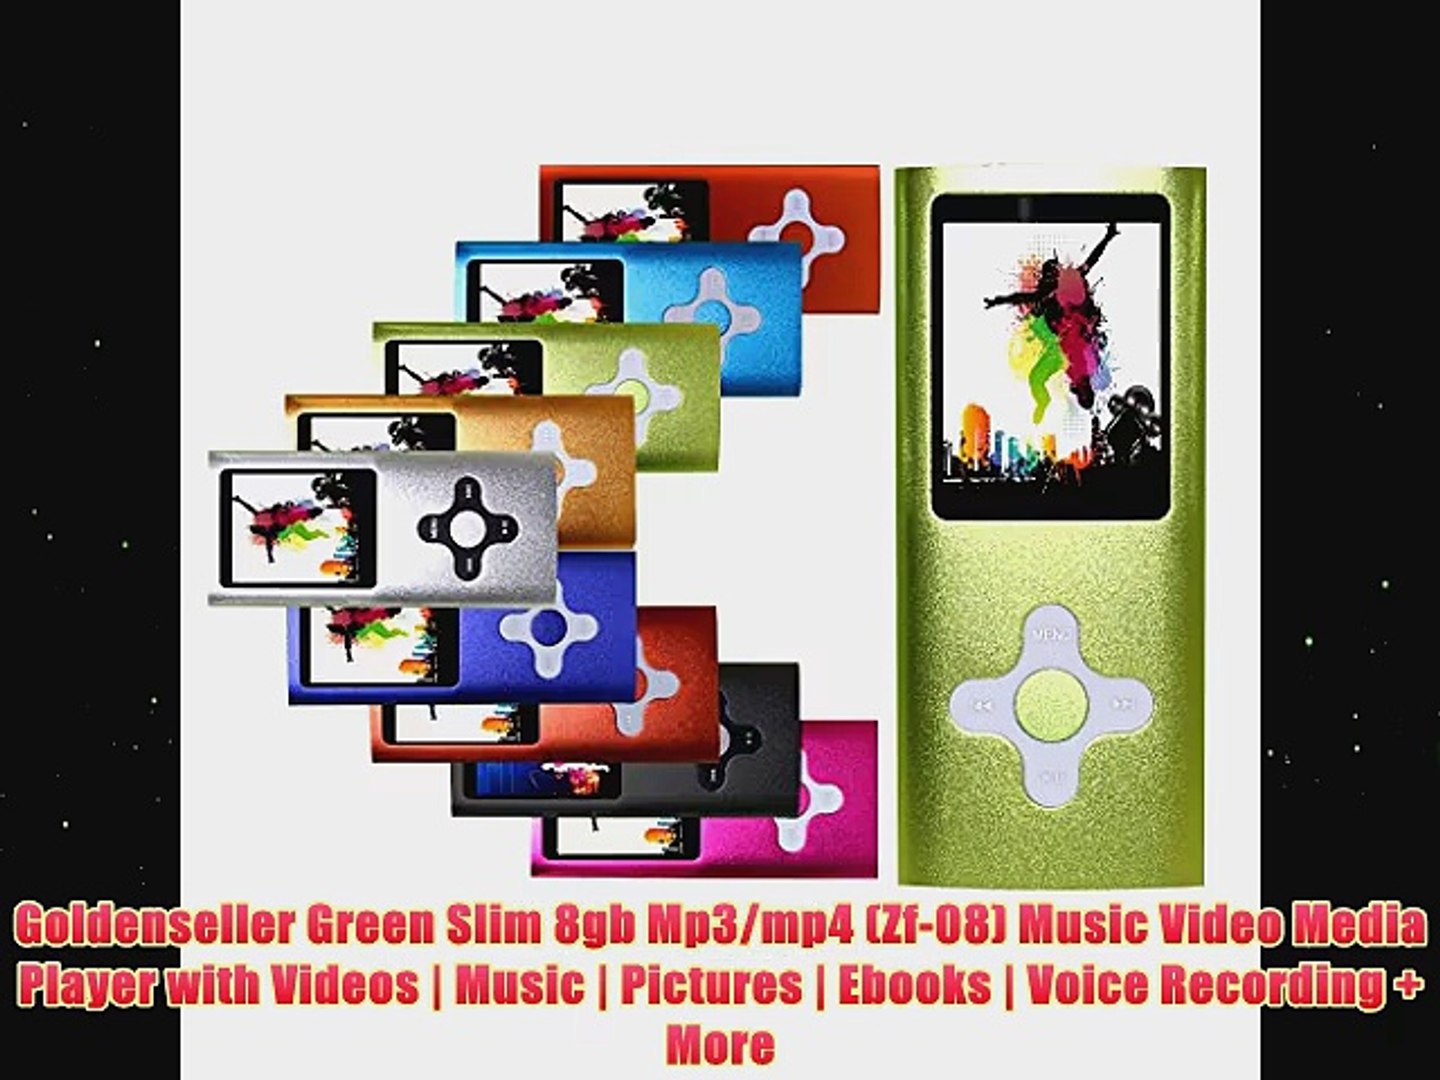 Goldenseller Green Slim 8gb Mp3mp4 Zf08 Music Video Media Player with Videos Music Pictures Ebooks V